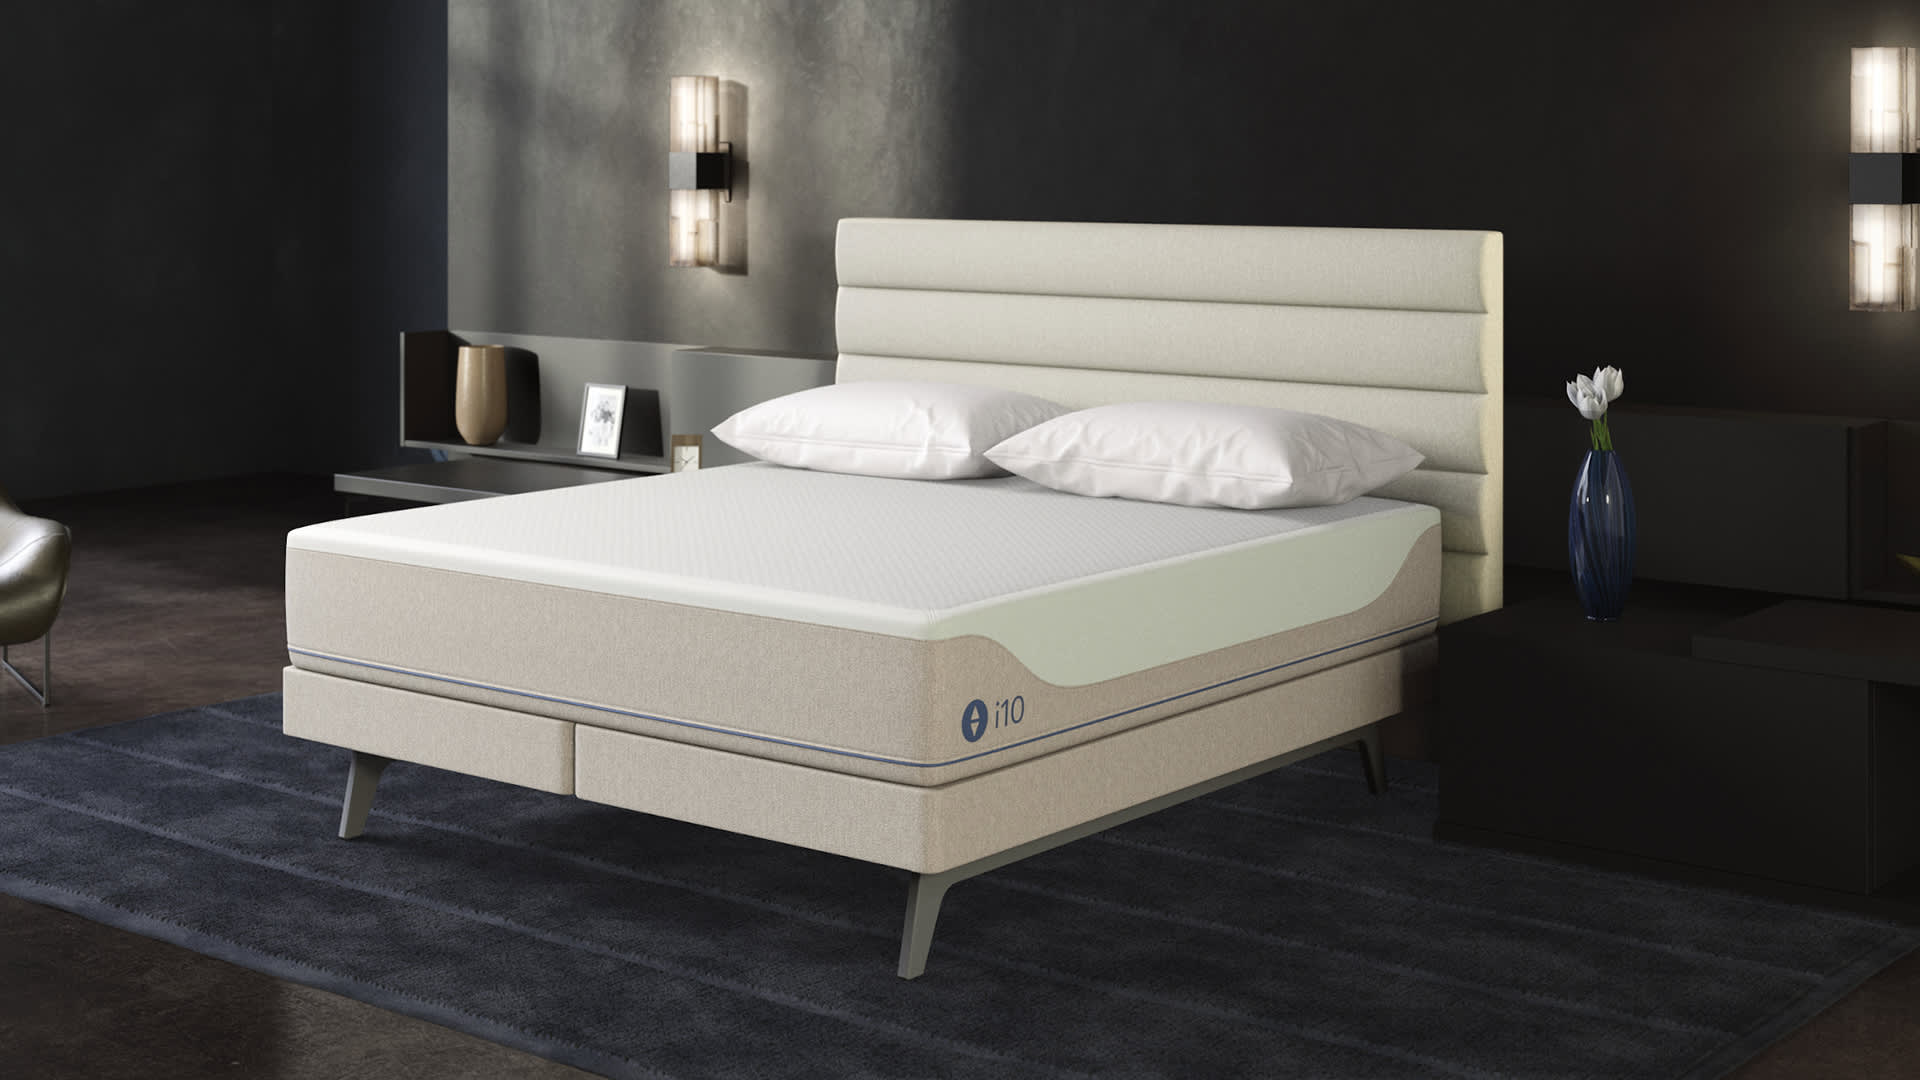 Sleep Number Mattress Review 2021, Do Sleep Number Bed Adjust Up And Down